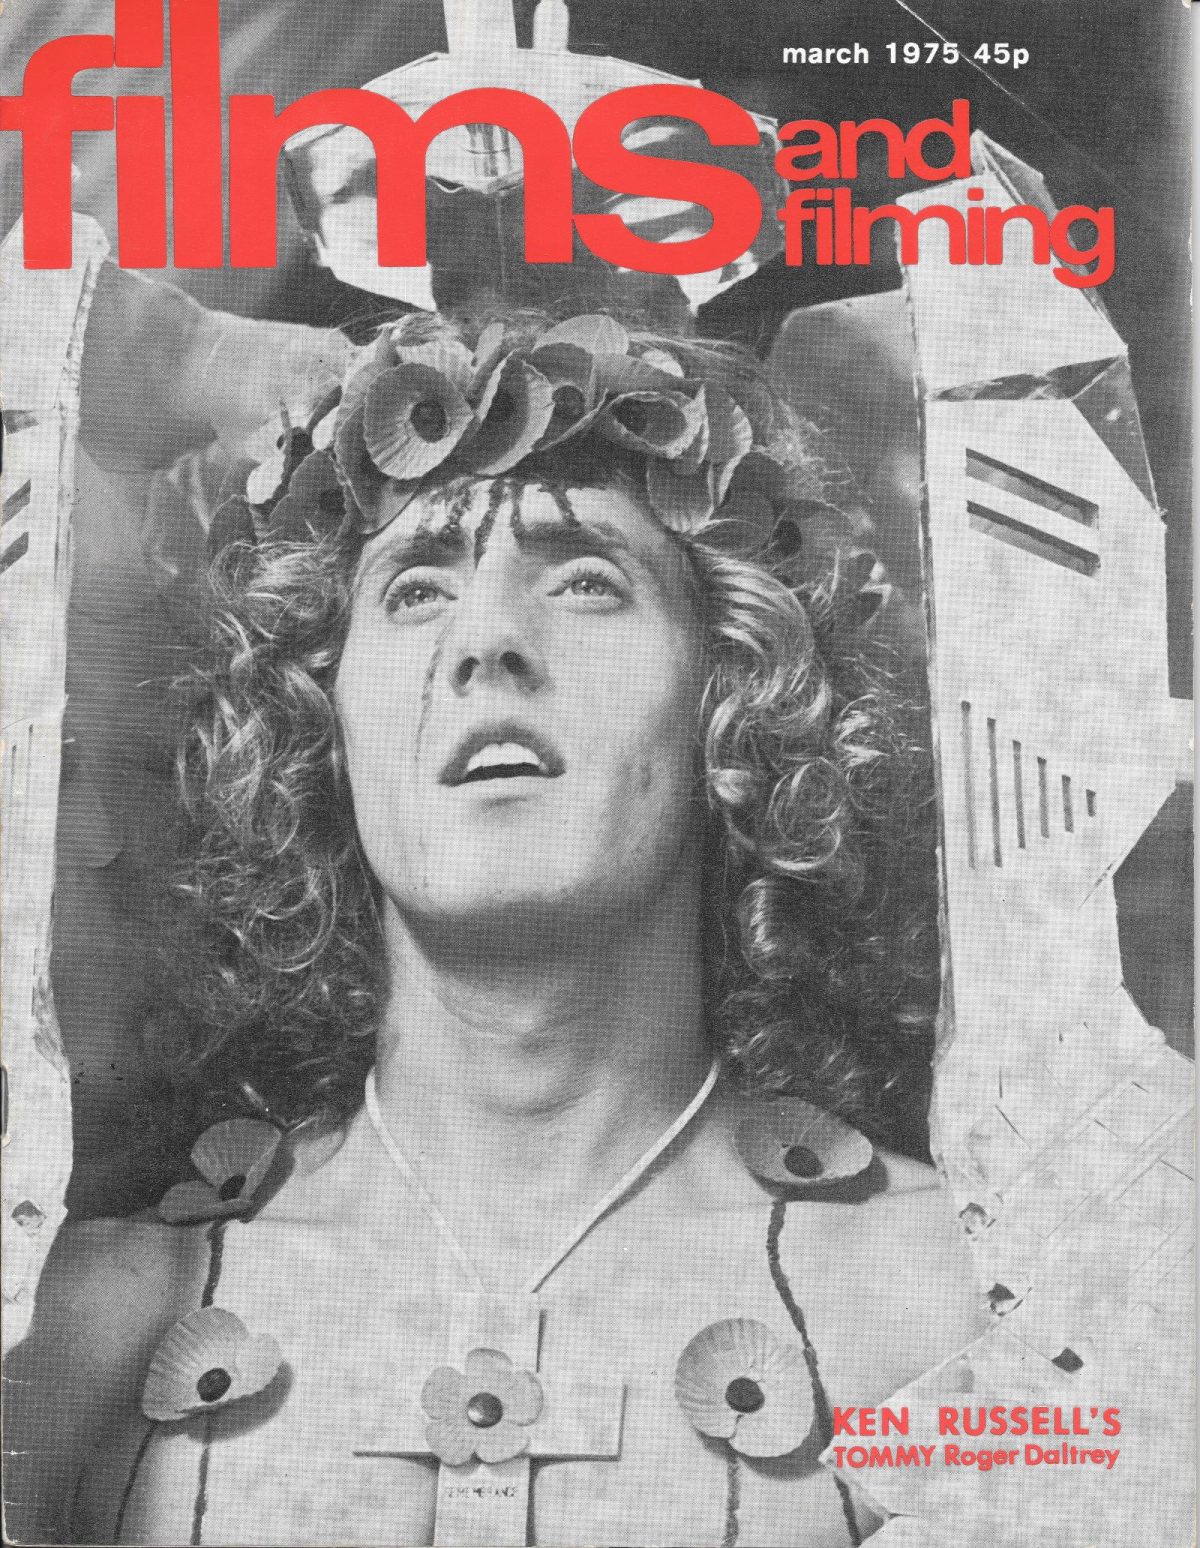 Films & Filming, film, magazines, Ken Russell, Tommy, Roger Daltrey, The Who, 1970s